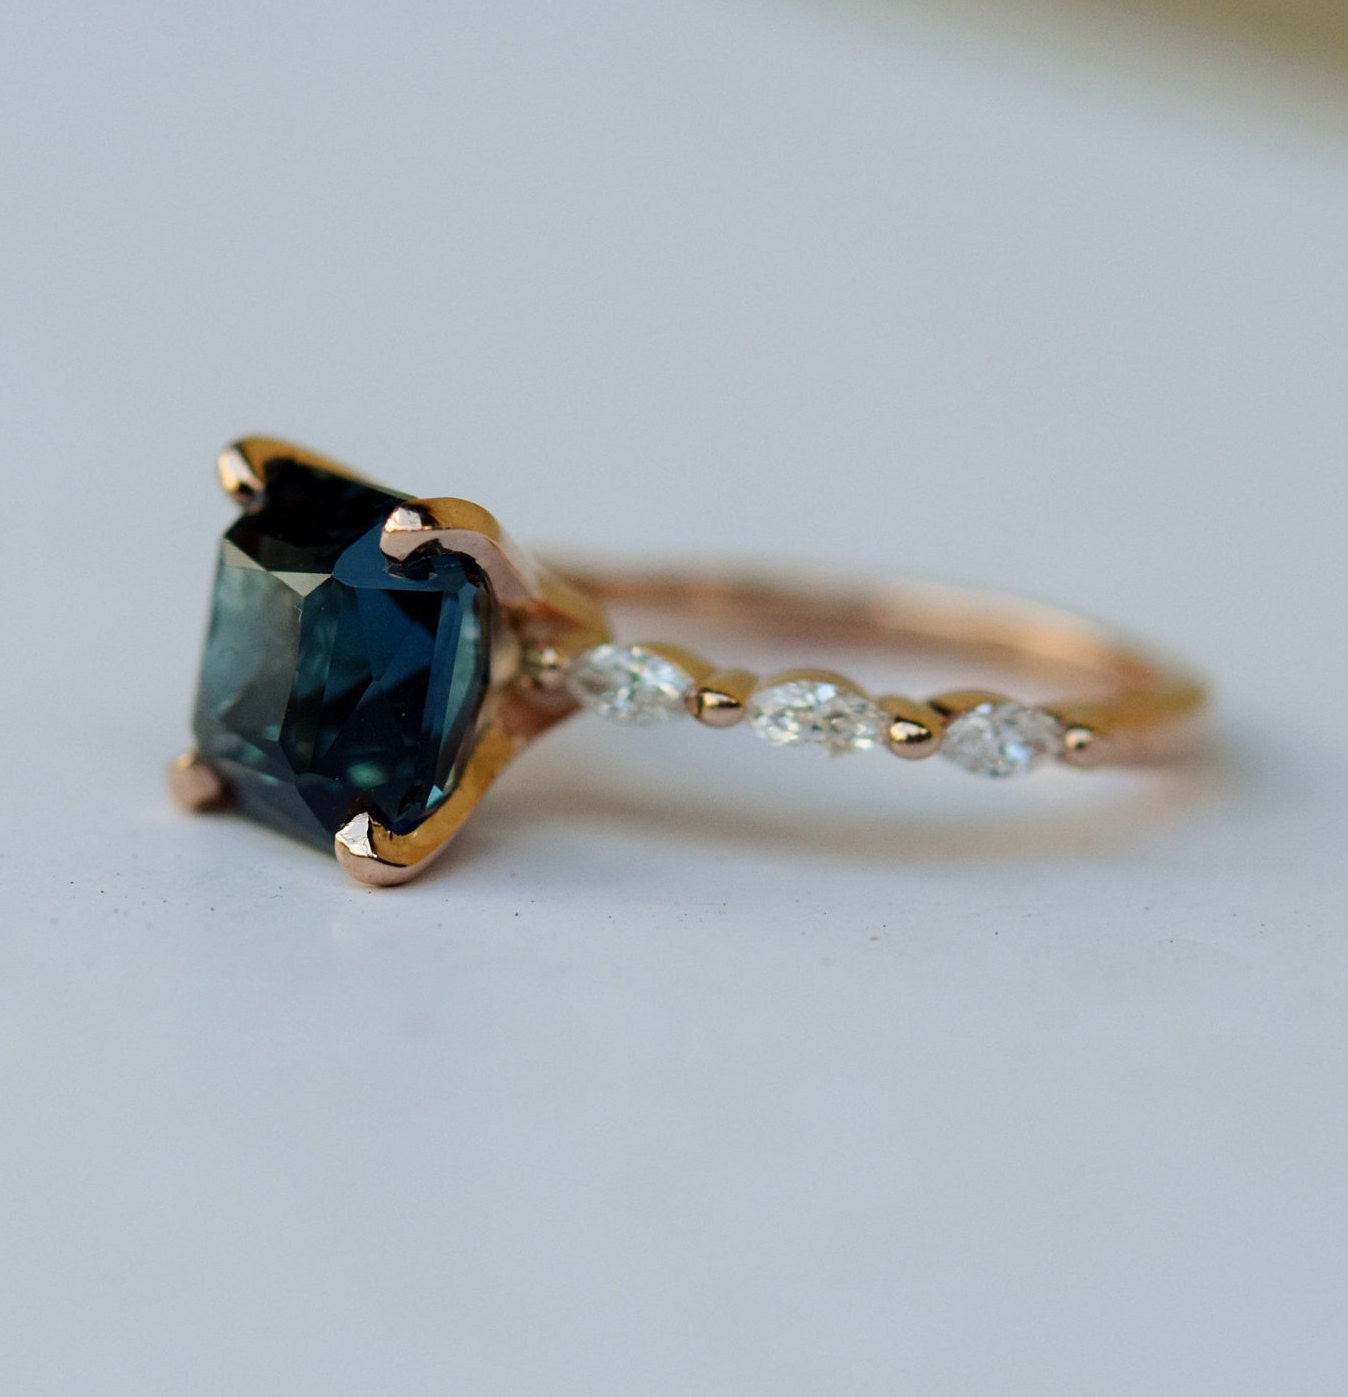 Radiant Blue Sapphire Engagement Ring. Peacock Blue Sapphire | Etsy